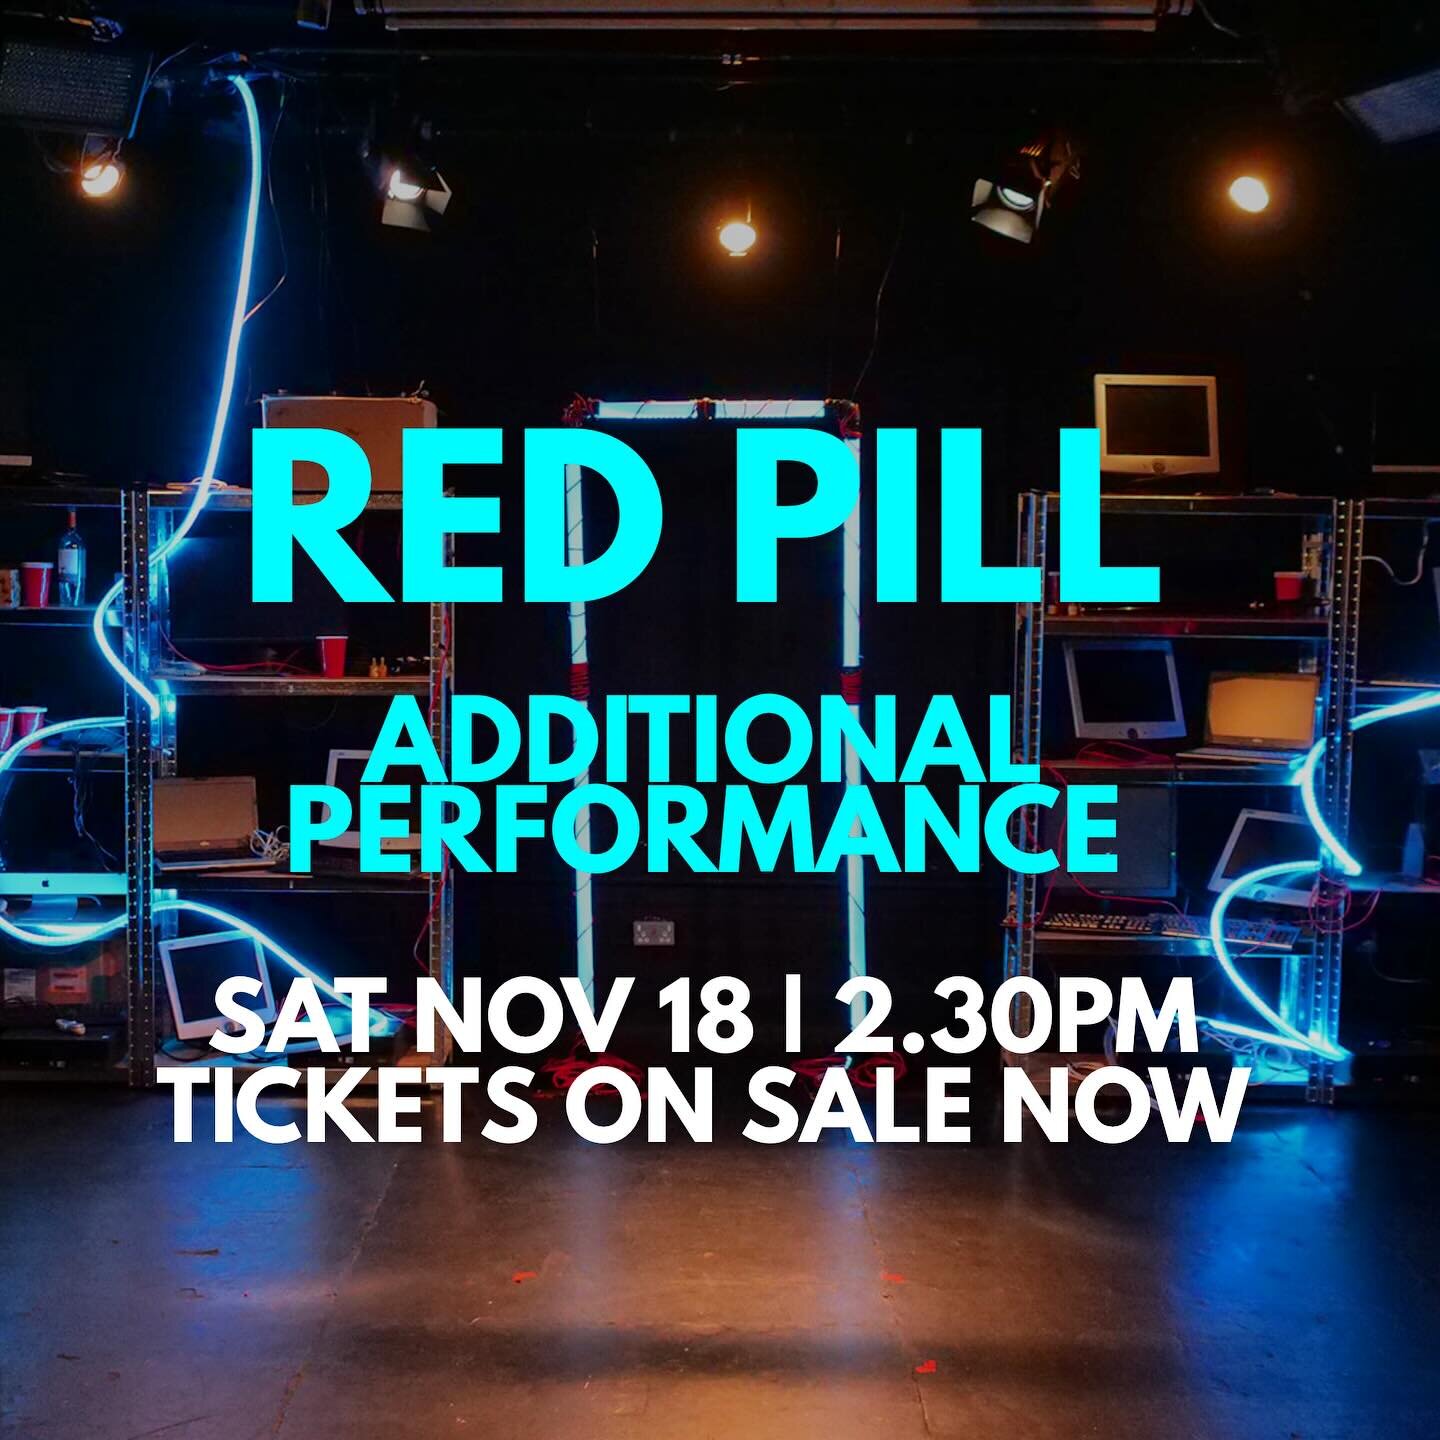 If you&rsquo;re free next Saturday we&rsquo;ve just added an additional matinee performance of #RedPill from @BlueBarProd. 

🎮 Sat 18 Nov | 2.30pm

Tickets on sale now! 
🎟️ app.lineupnow.com/event/red-pill&hellip;
_
_
_
_
#theatre #stage #performan